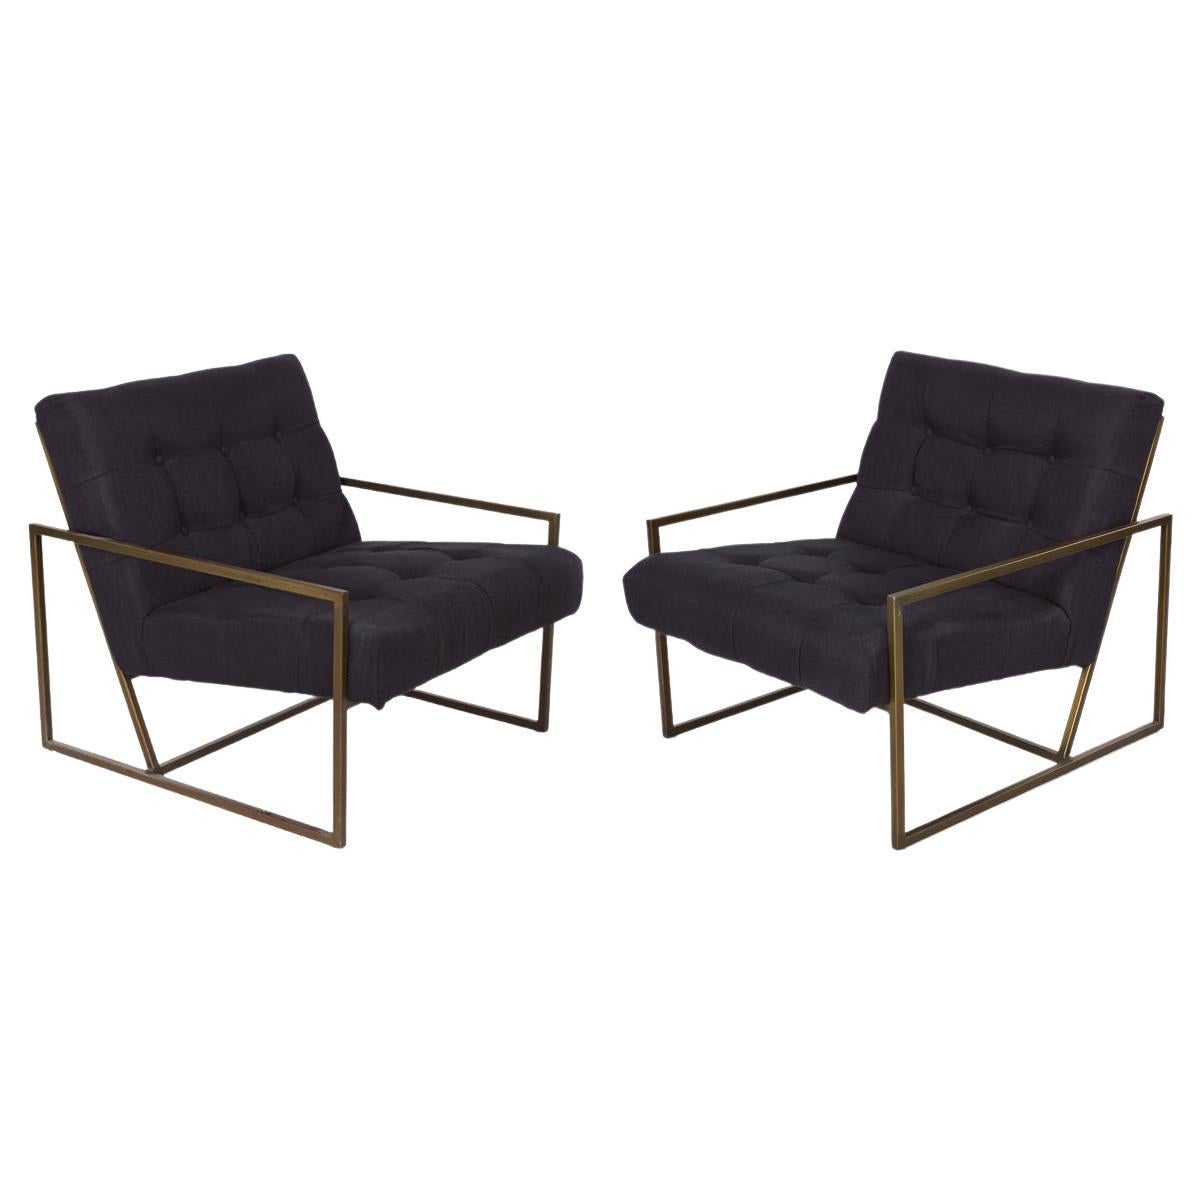 Regina Andrew Pair of Mid-Century Modern Style Tufted Steel Arm Chairs For Sale